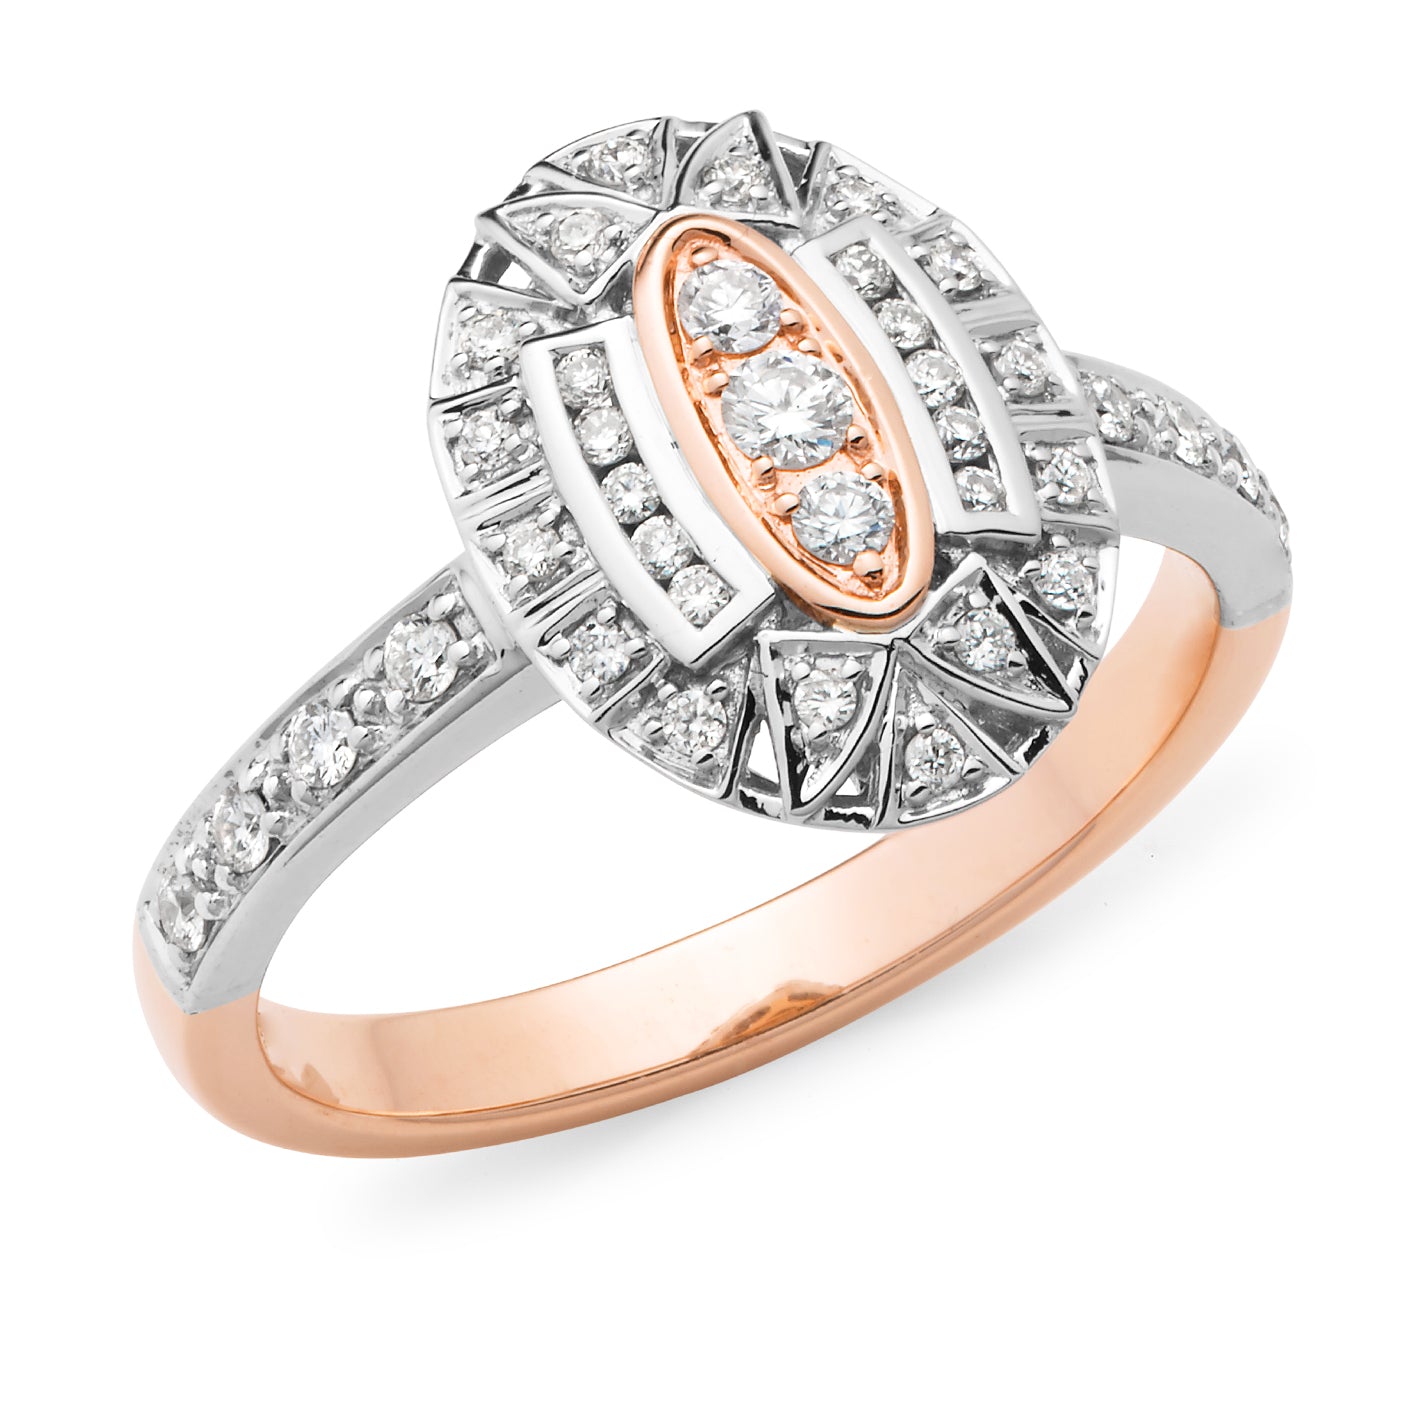 Hedy' Art Deco Style Diamond Ring in 9ct Rose & White Gold